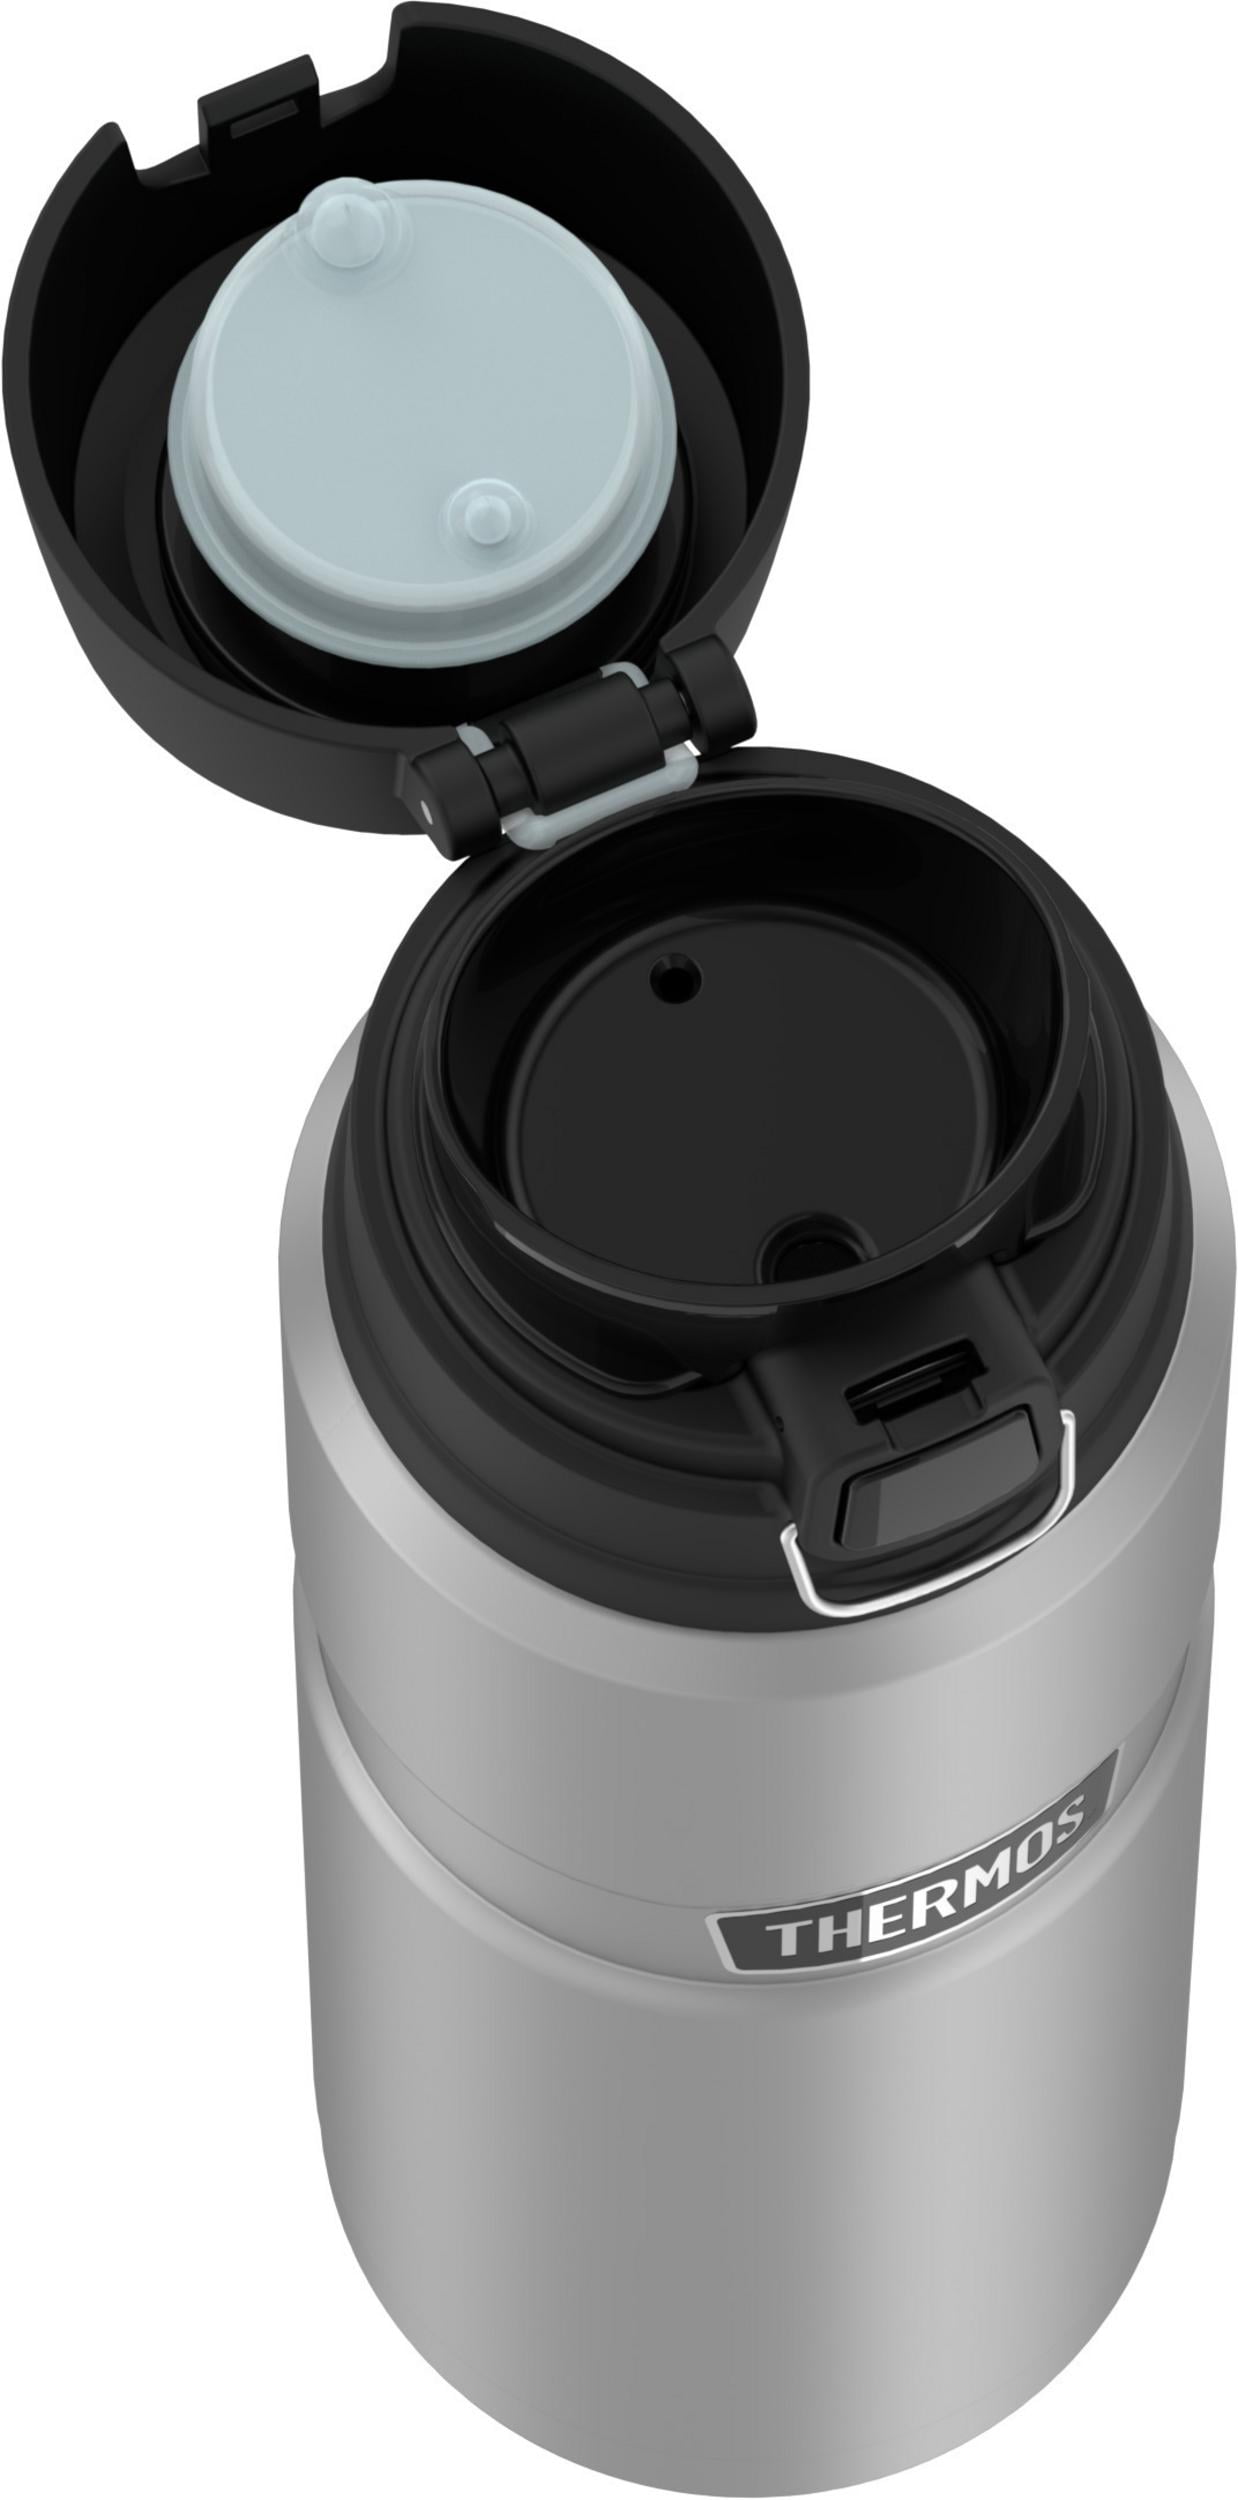  THERMOS LSU Classic Logo STAINLESS KING Stainless Steel Drink  Bottle, Vacuum insulated & Double Wall, 24oz : Home & Kitchen